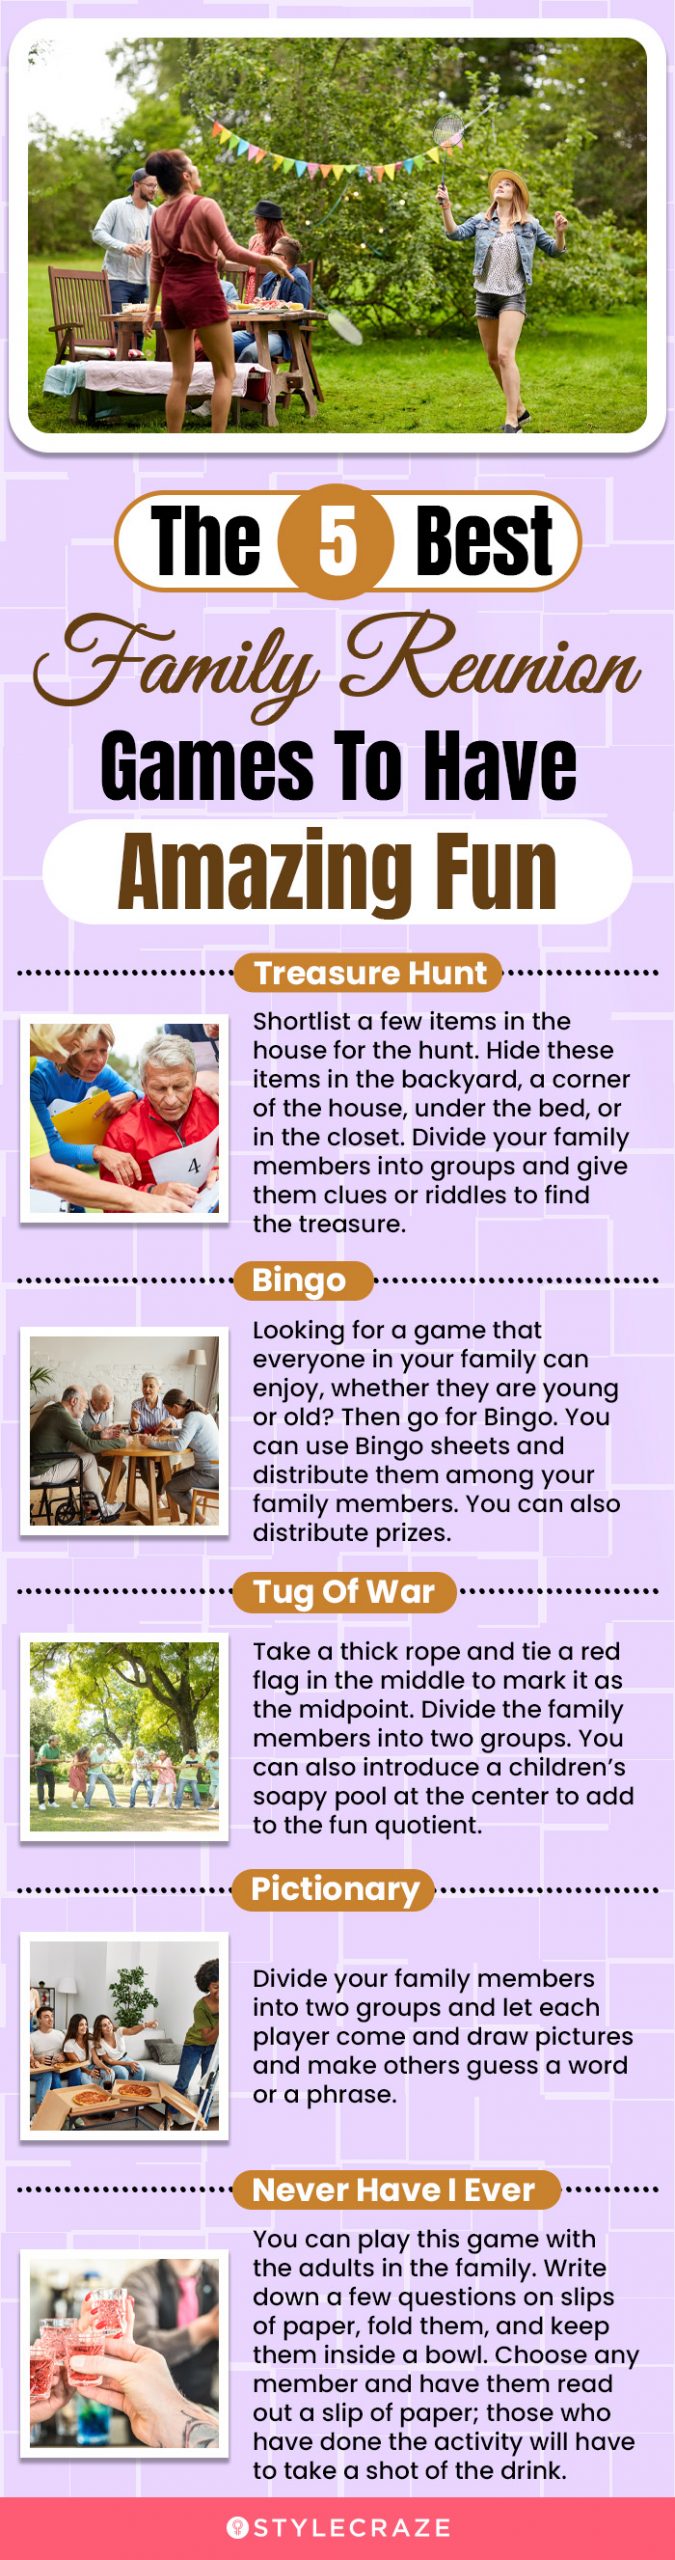 the 5 best family reunion games to have amazing fun (infographic)